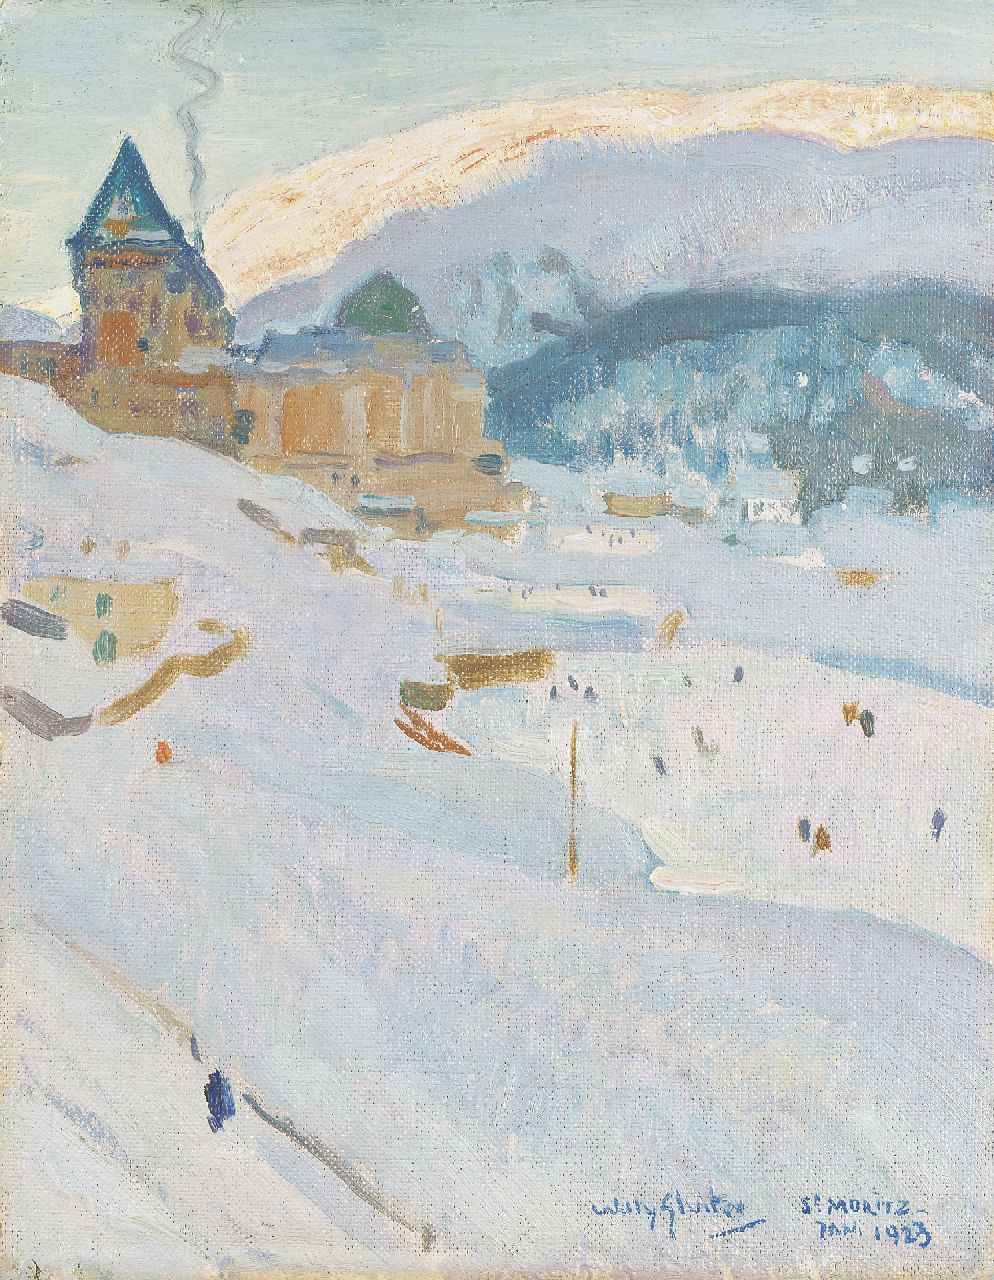 Sluiter J.W.  | Jan Willem 'Willy' Sluiter, St. Moritz with the Palace Hotel in winter, oil on painter's board 34.8 x 26.9 cm, signed l.r. and dated Jan. 1923